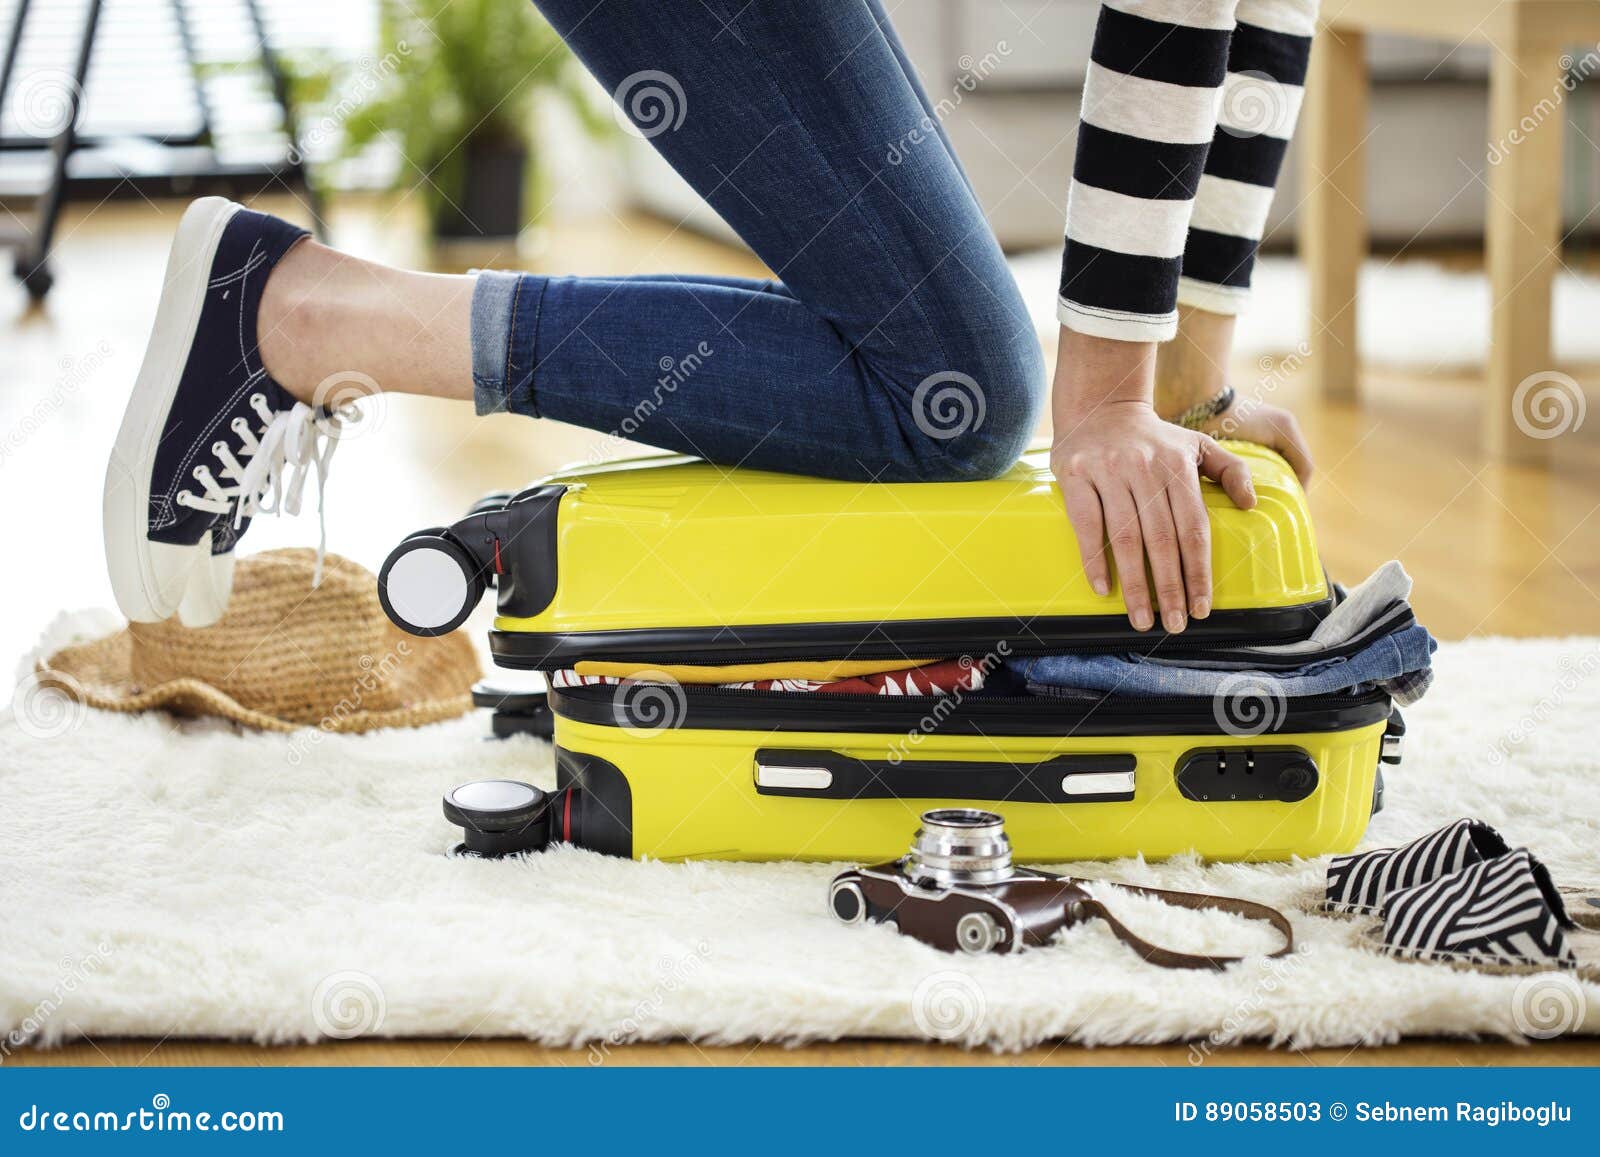 preparation travel suitcase at home